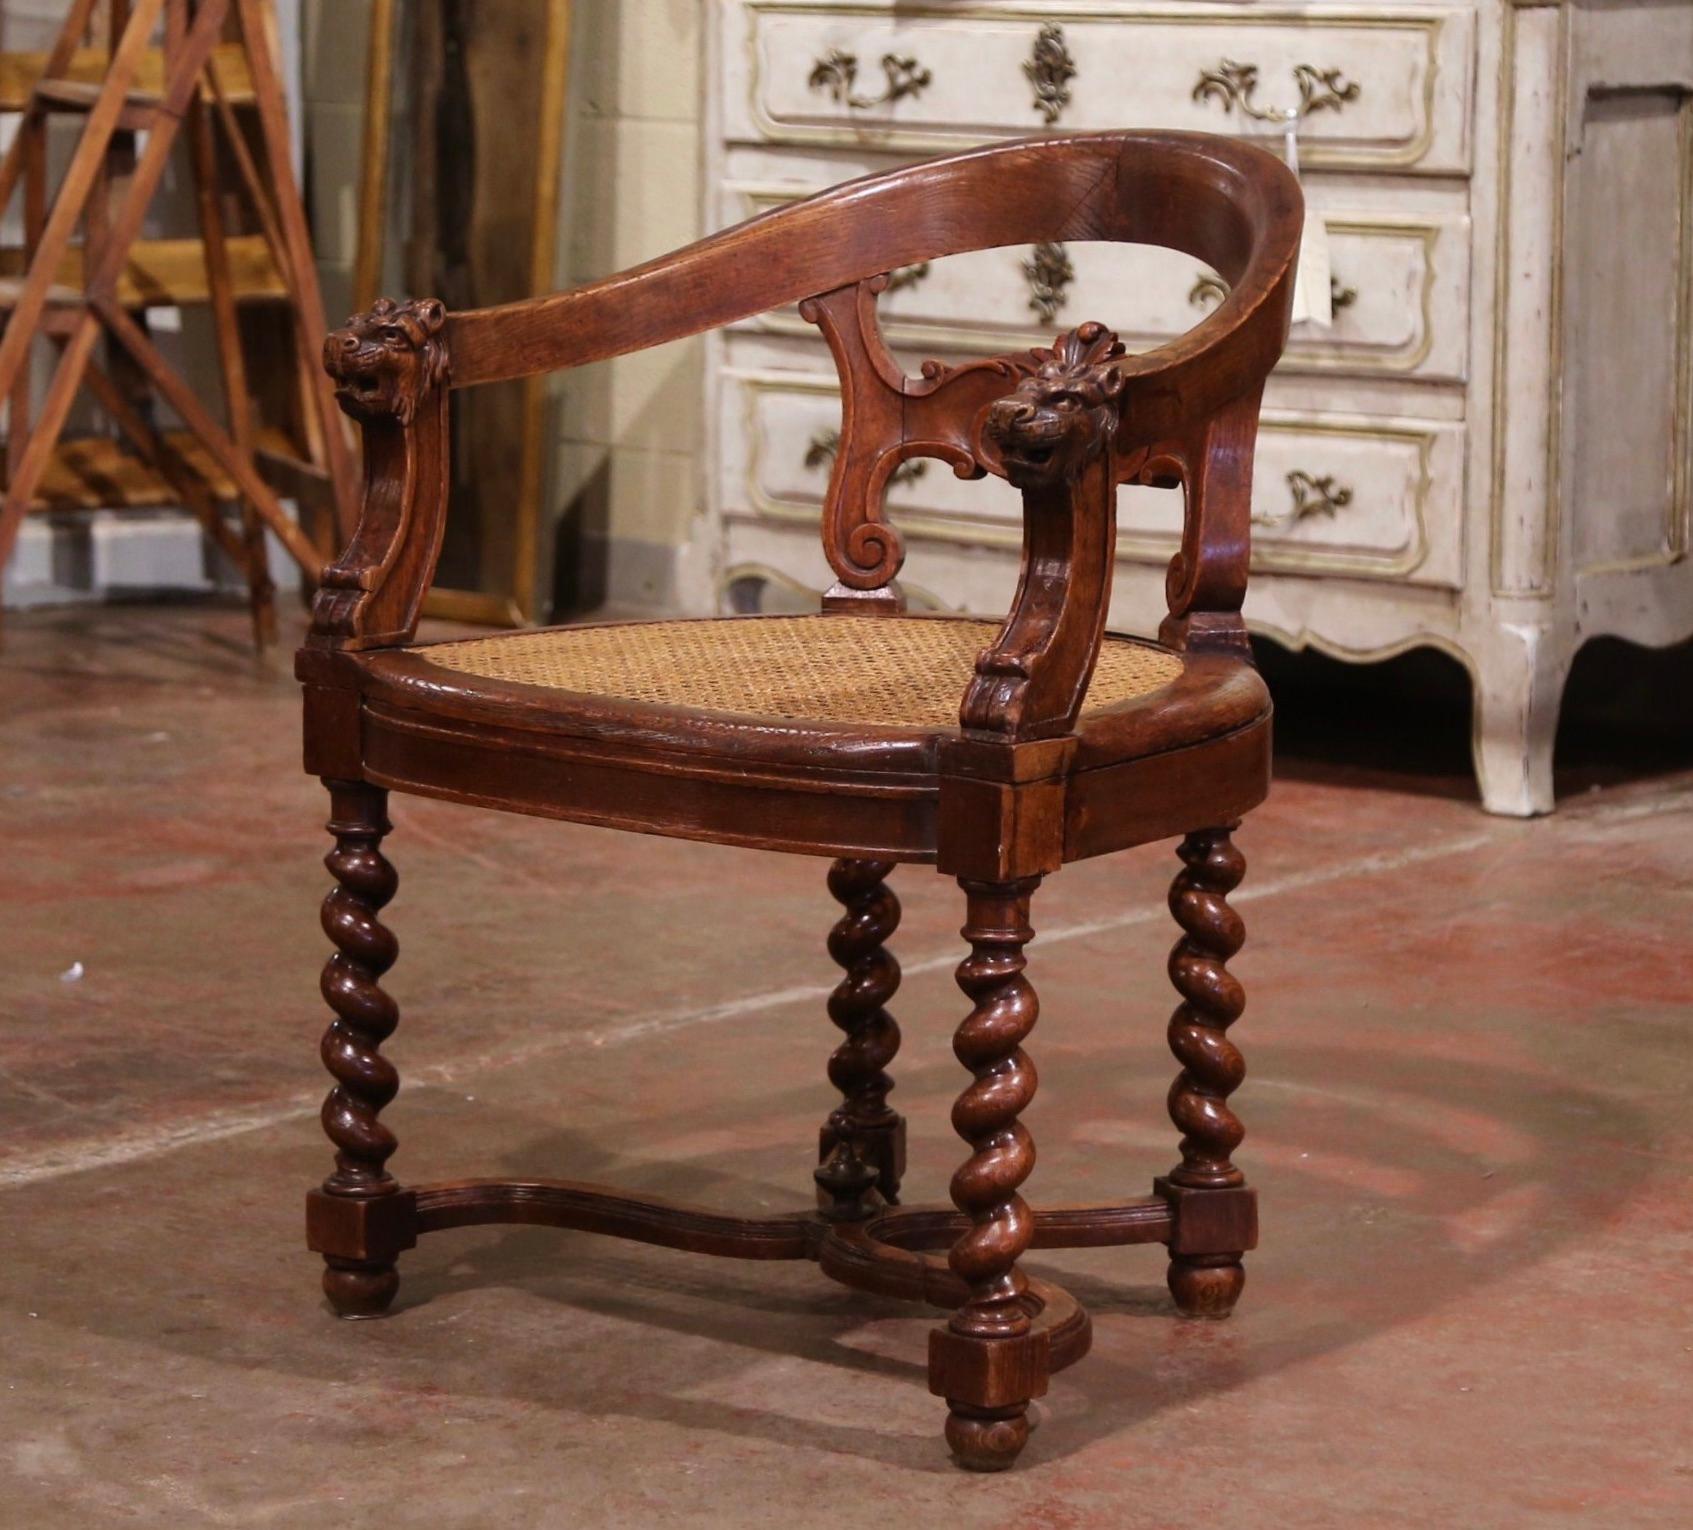 This elegant antique armchair was crafted in France, circa 1880. Built of oakwood, the armchair stands on barley twist legs embellished with a scrolled 